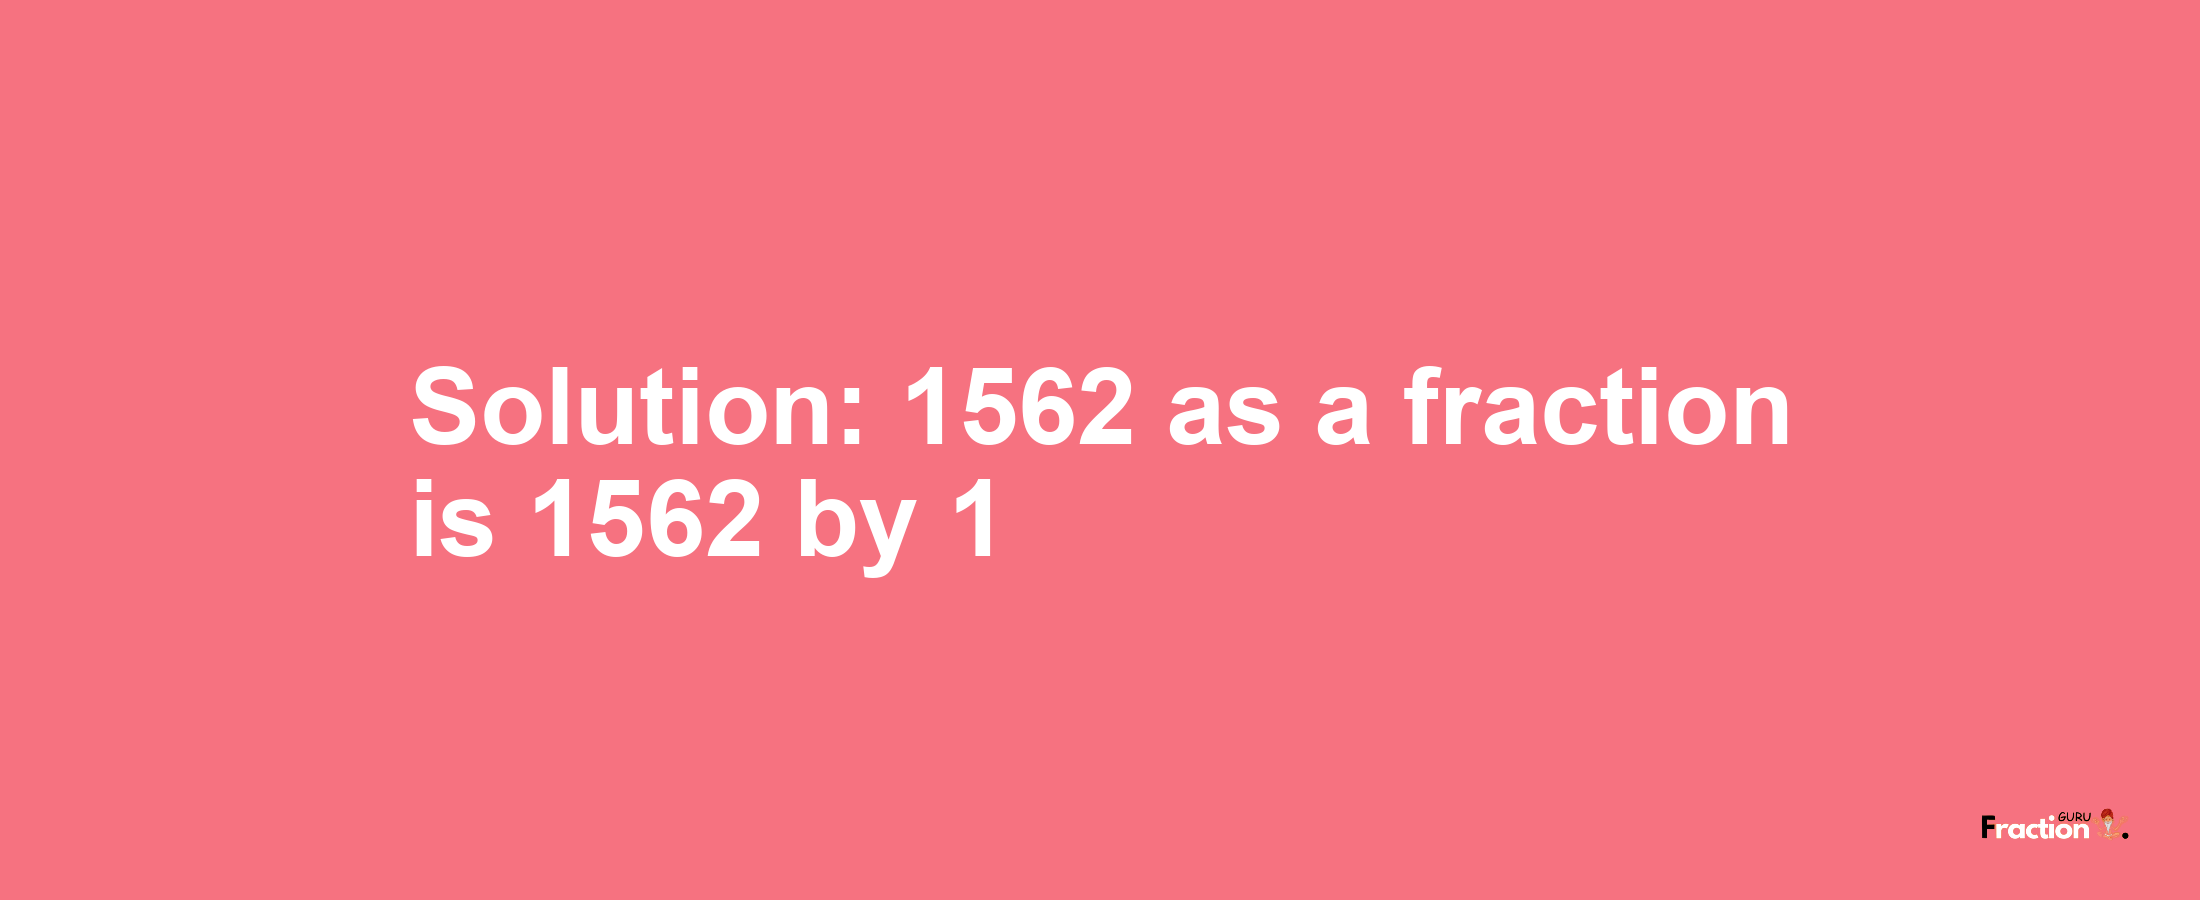 Solution:1562 as a fraction is 1562/1